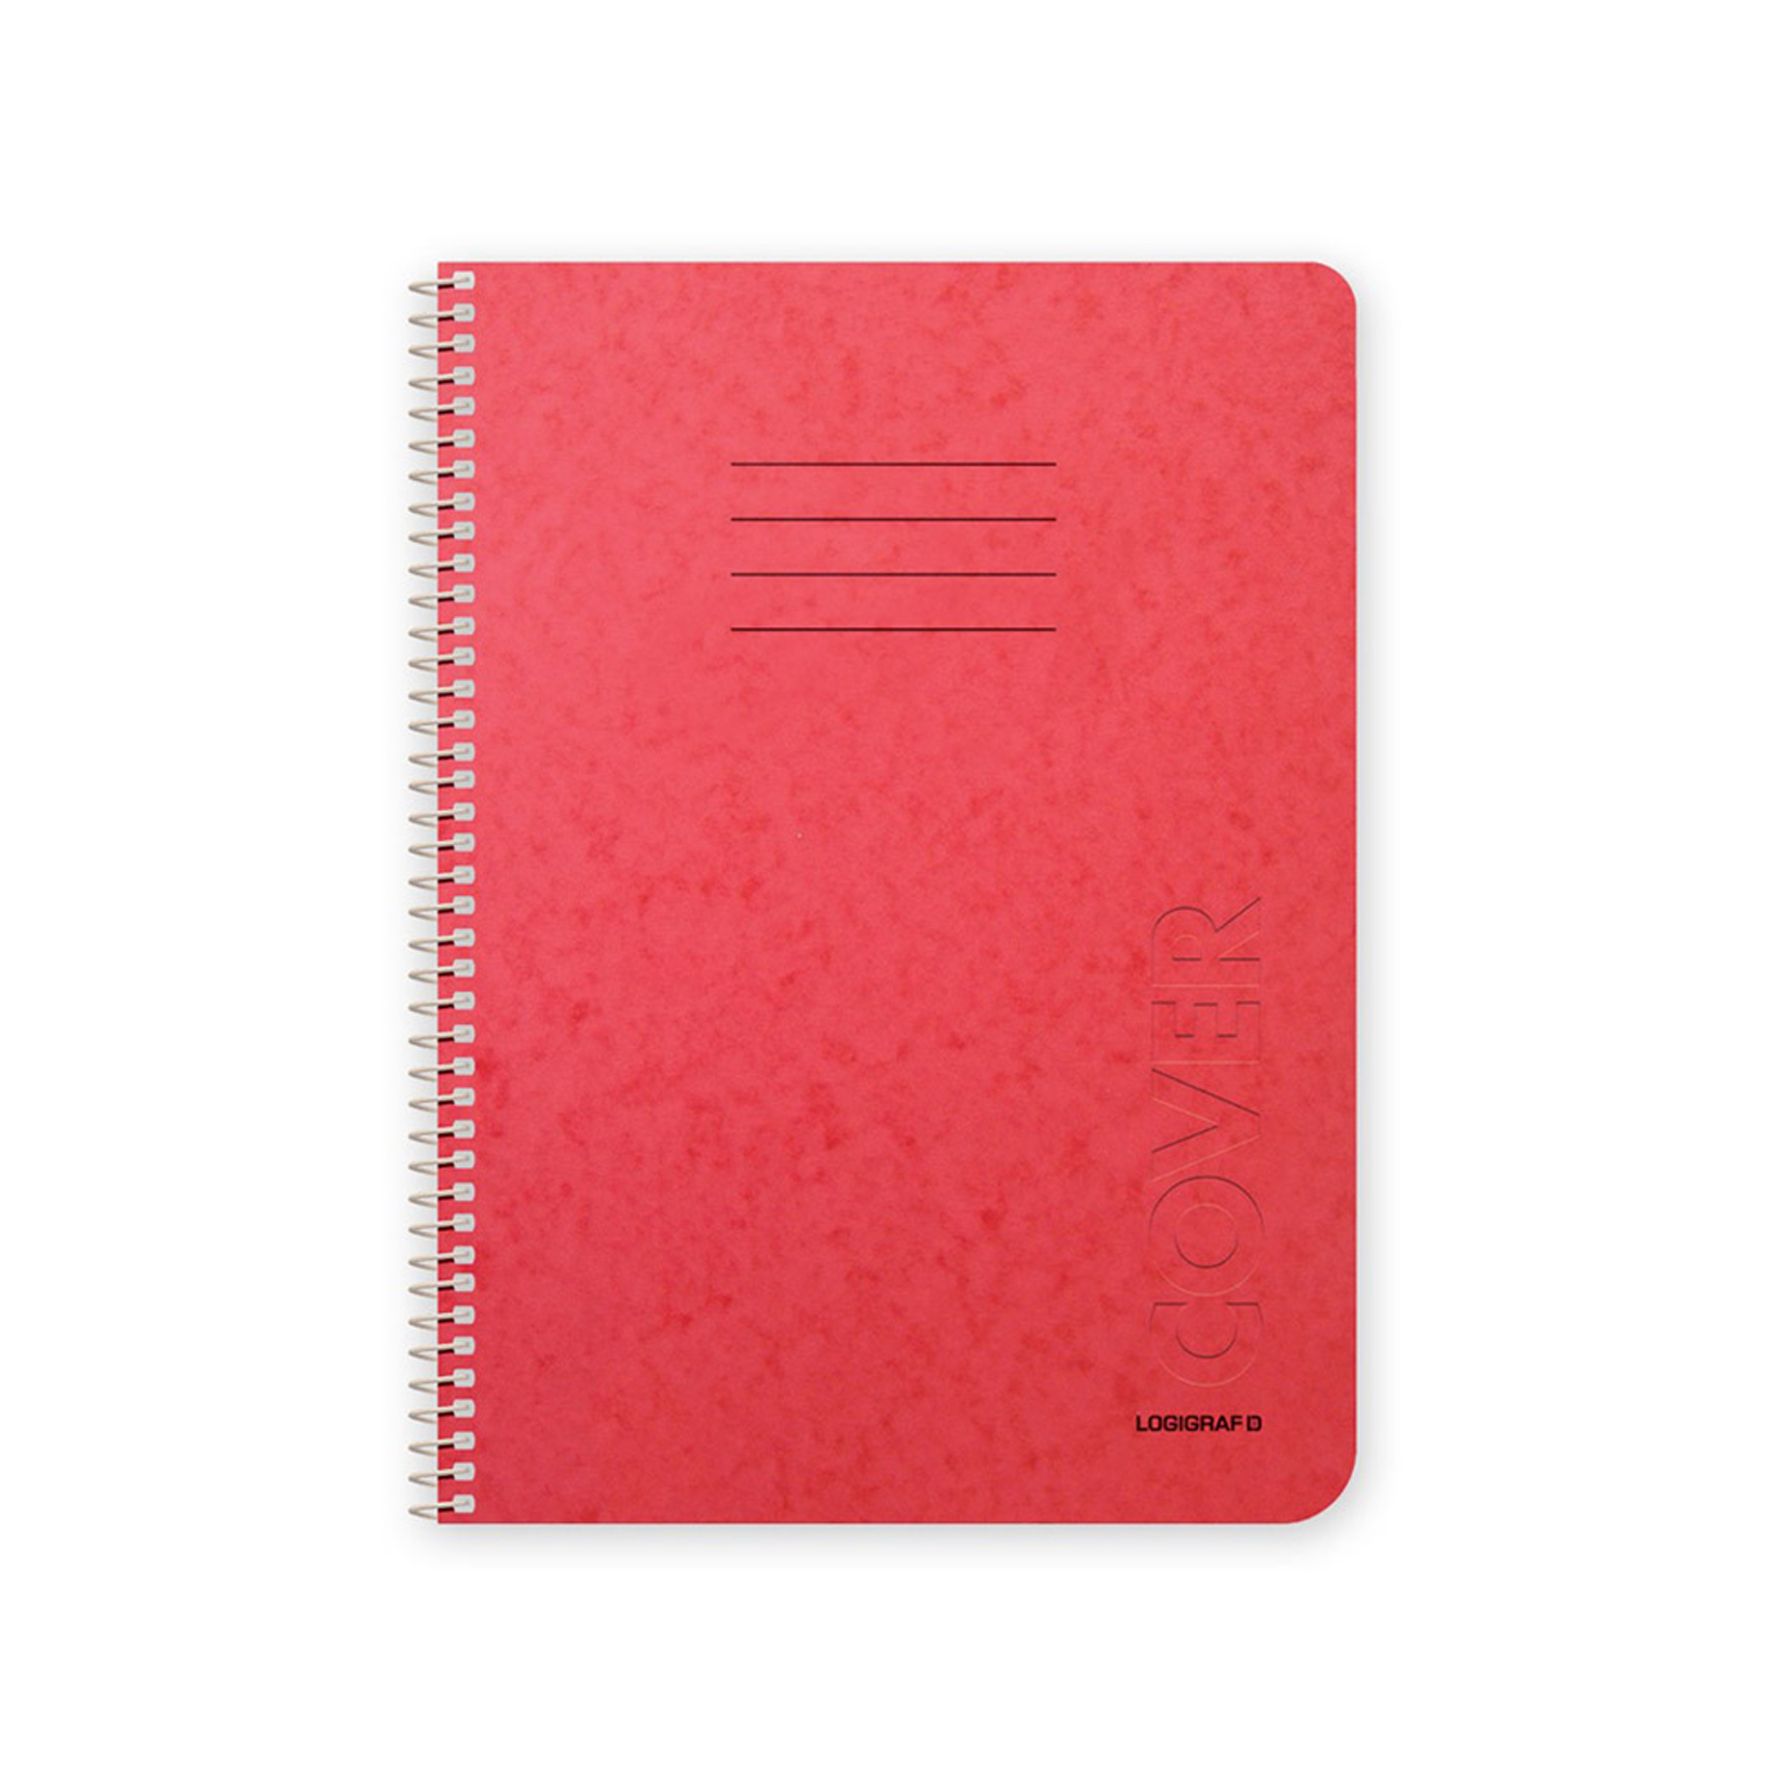 COVER Wirelock Notebook A4/21Χ29 5 Subjects 150 Sheets 6pcs 10 colors